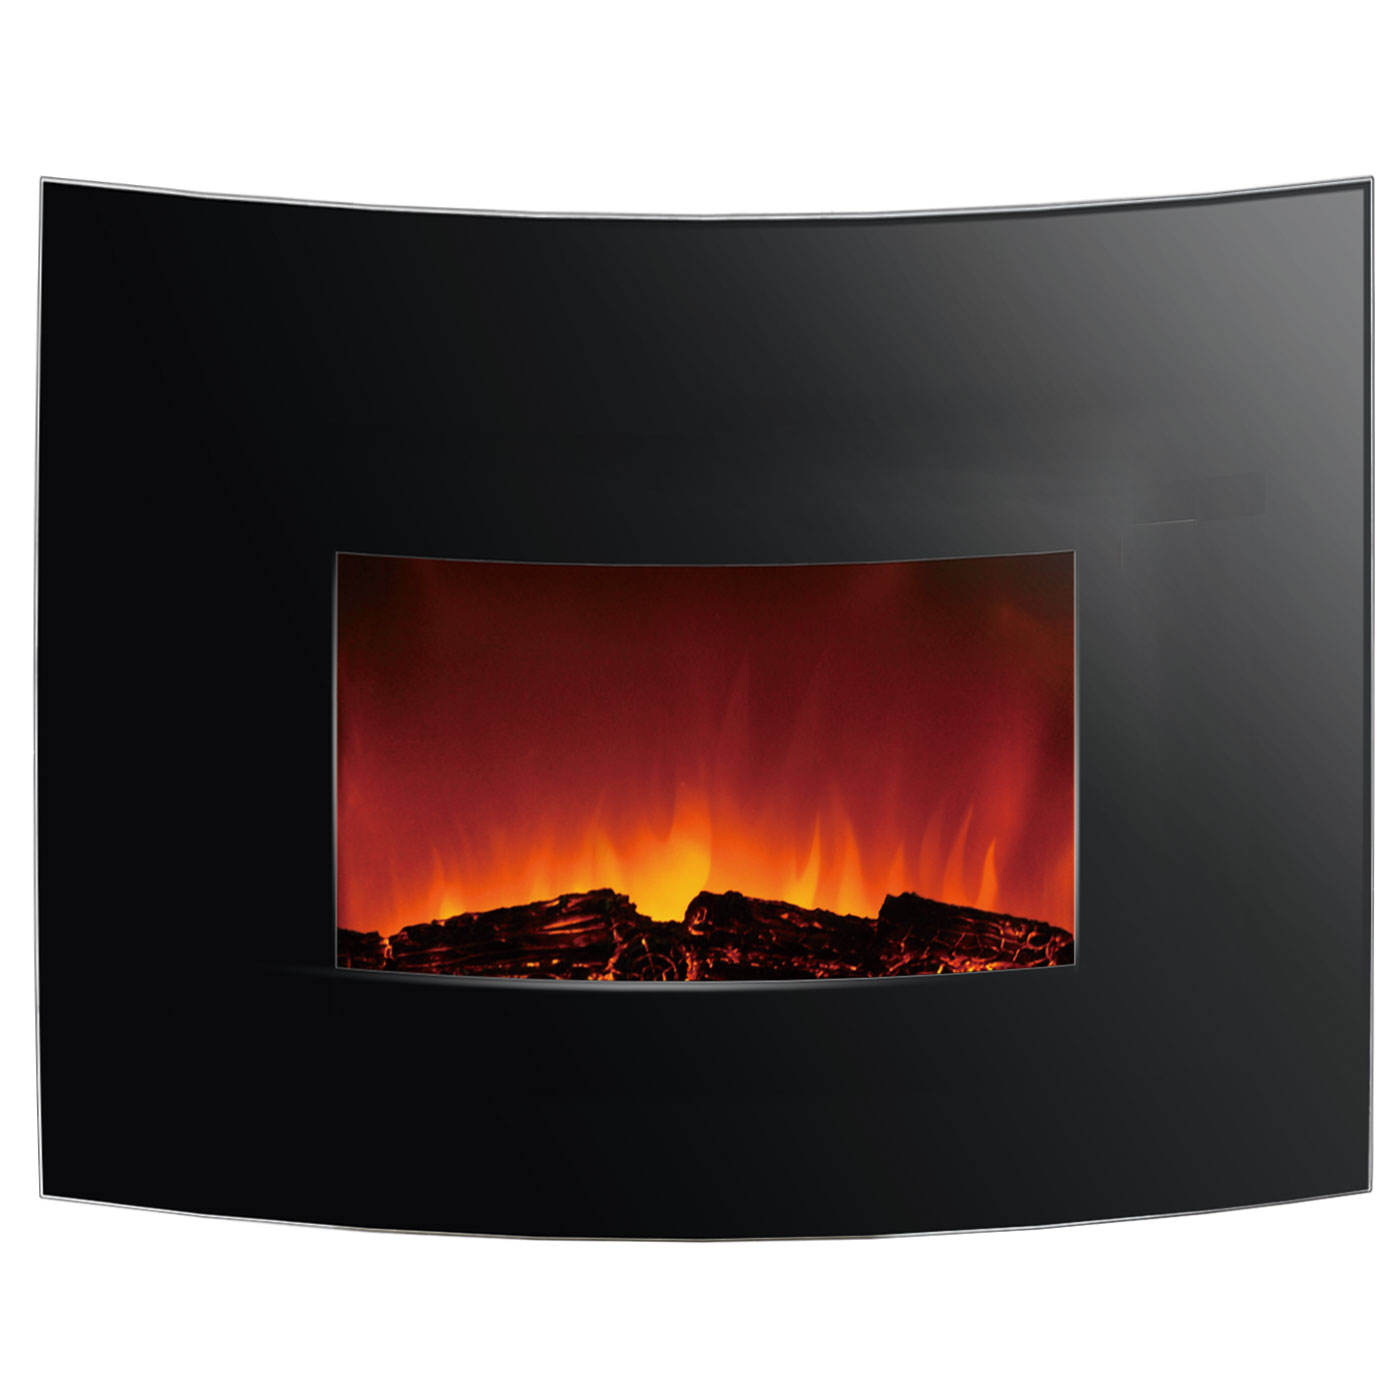 Decorative Curved Electrical Fireplace for warm.